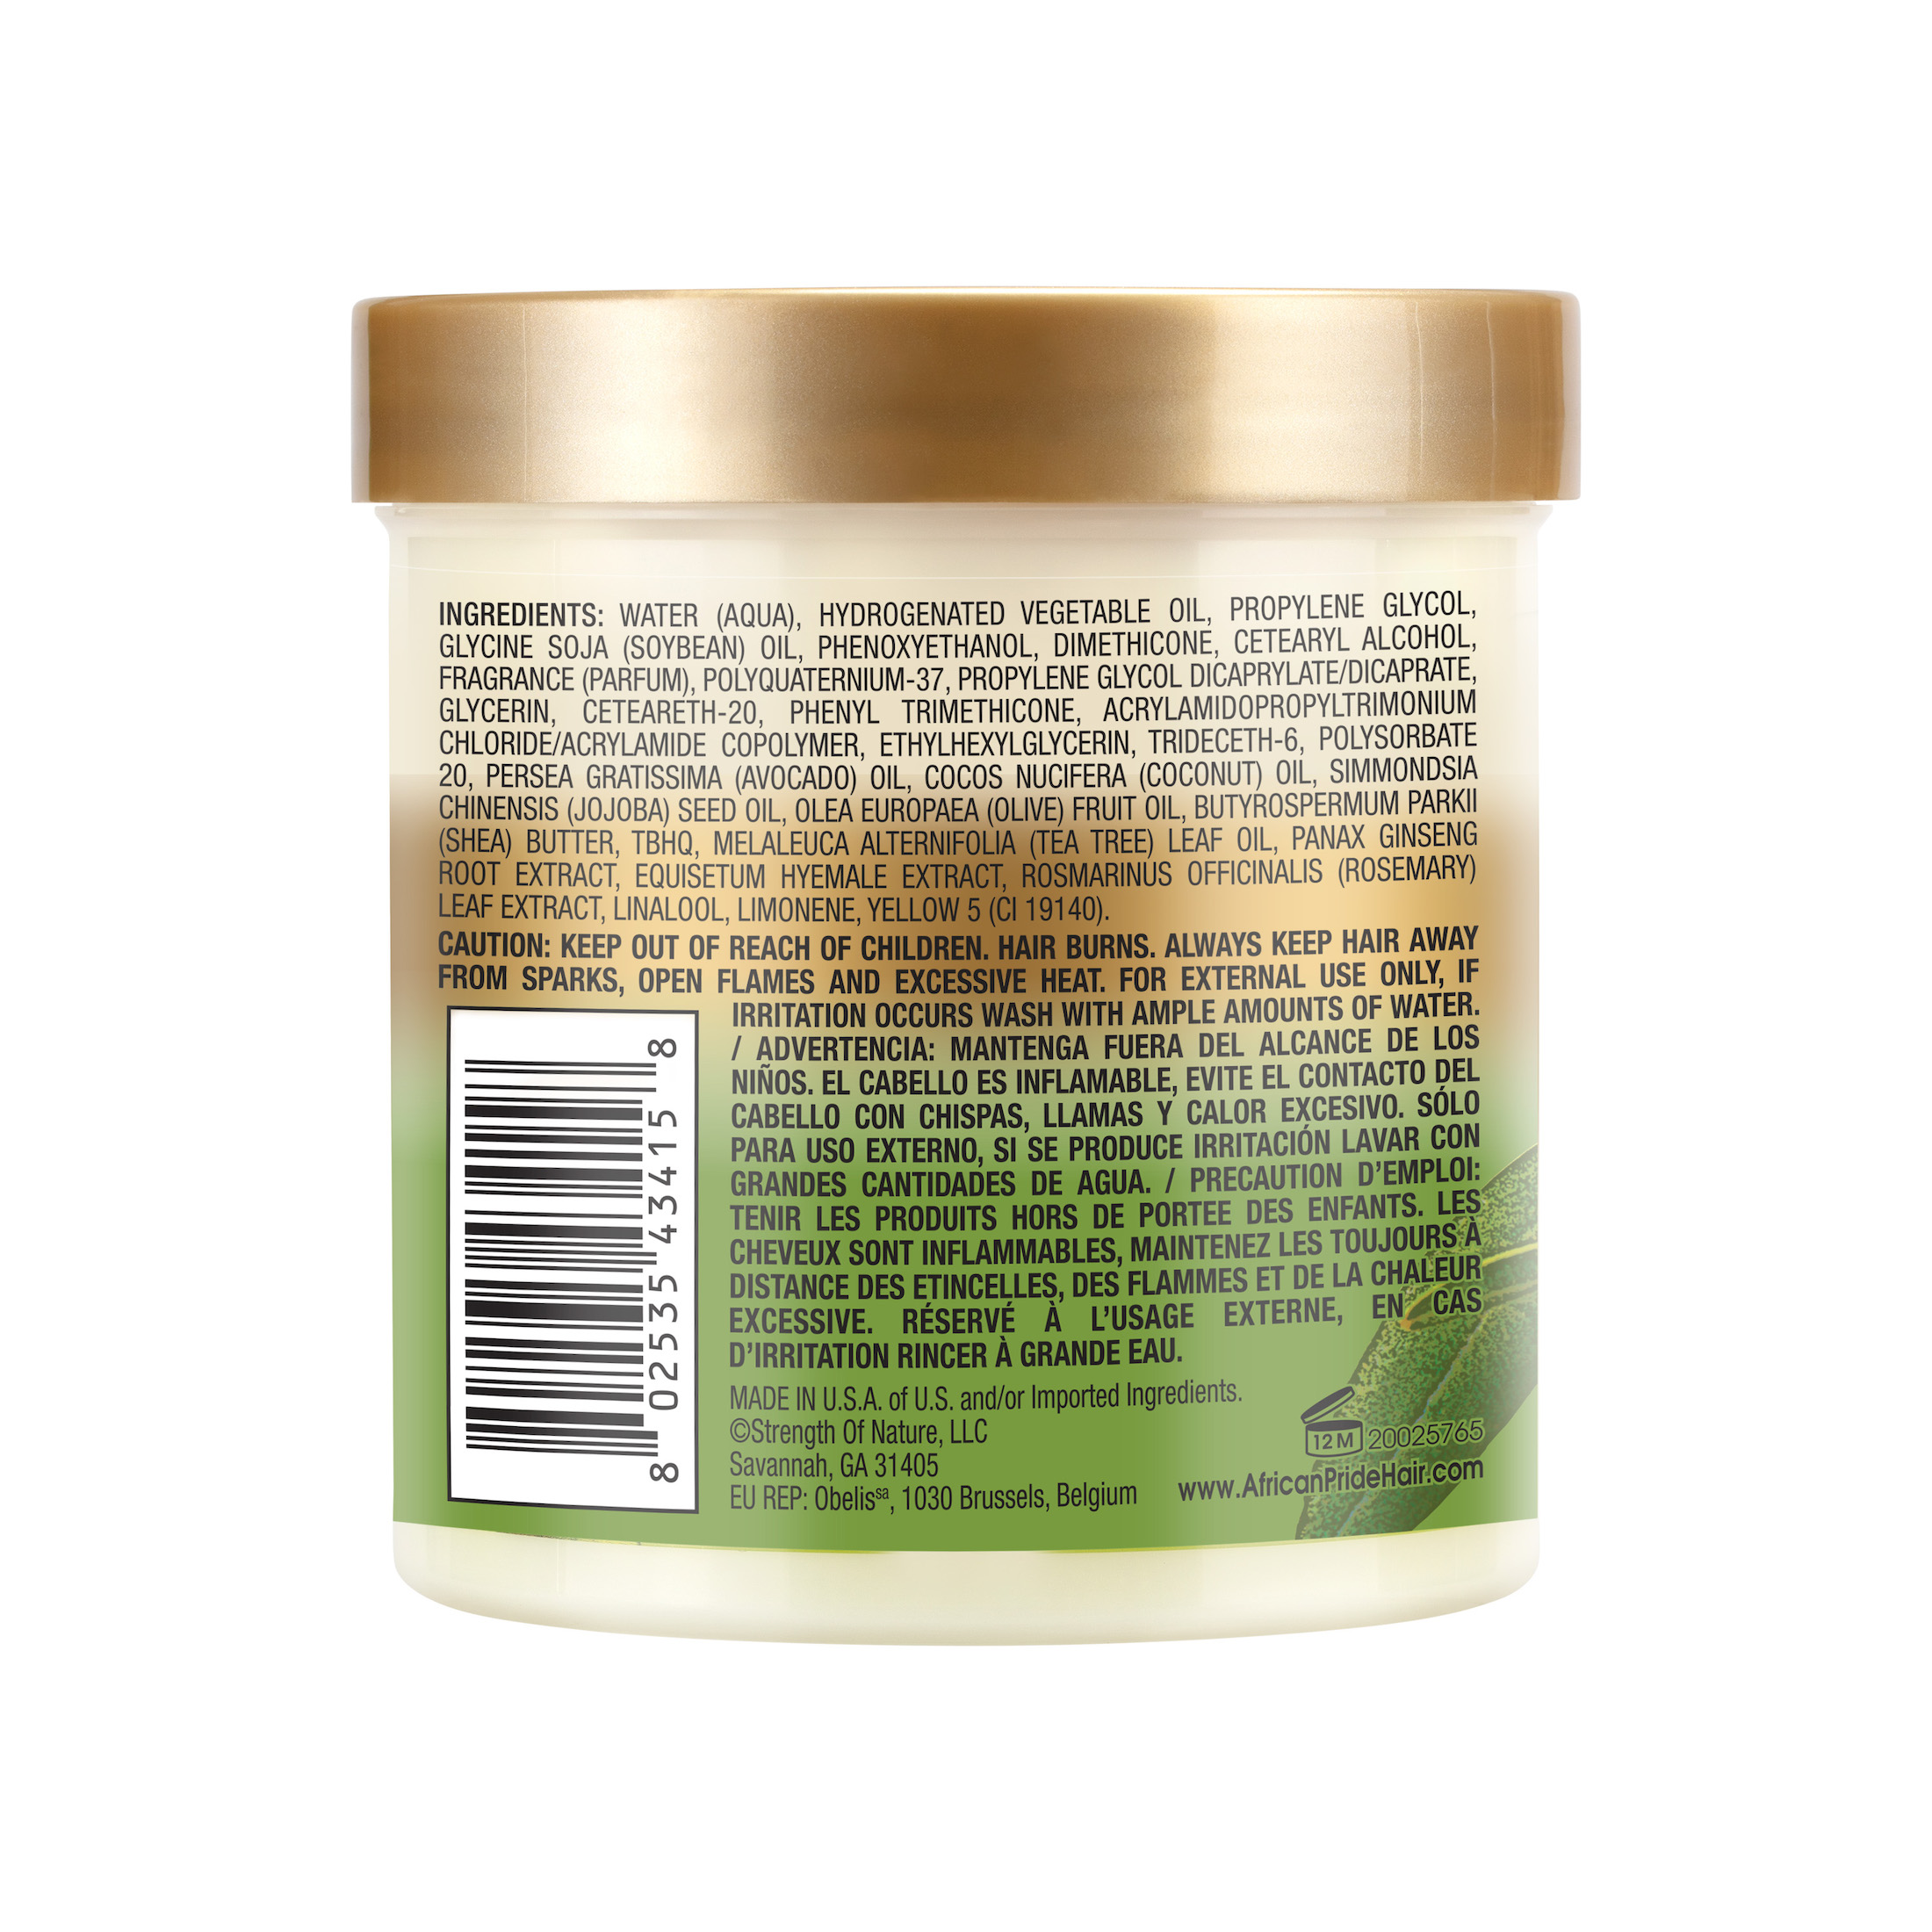 African Pride Olive Miracle Leave-in Conditioner 15 oz - image 2 of 7